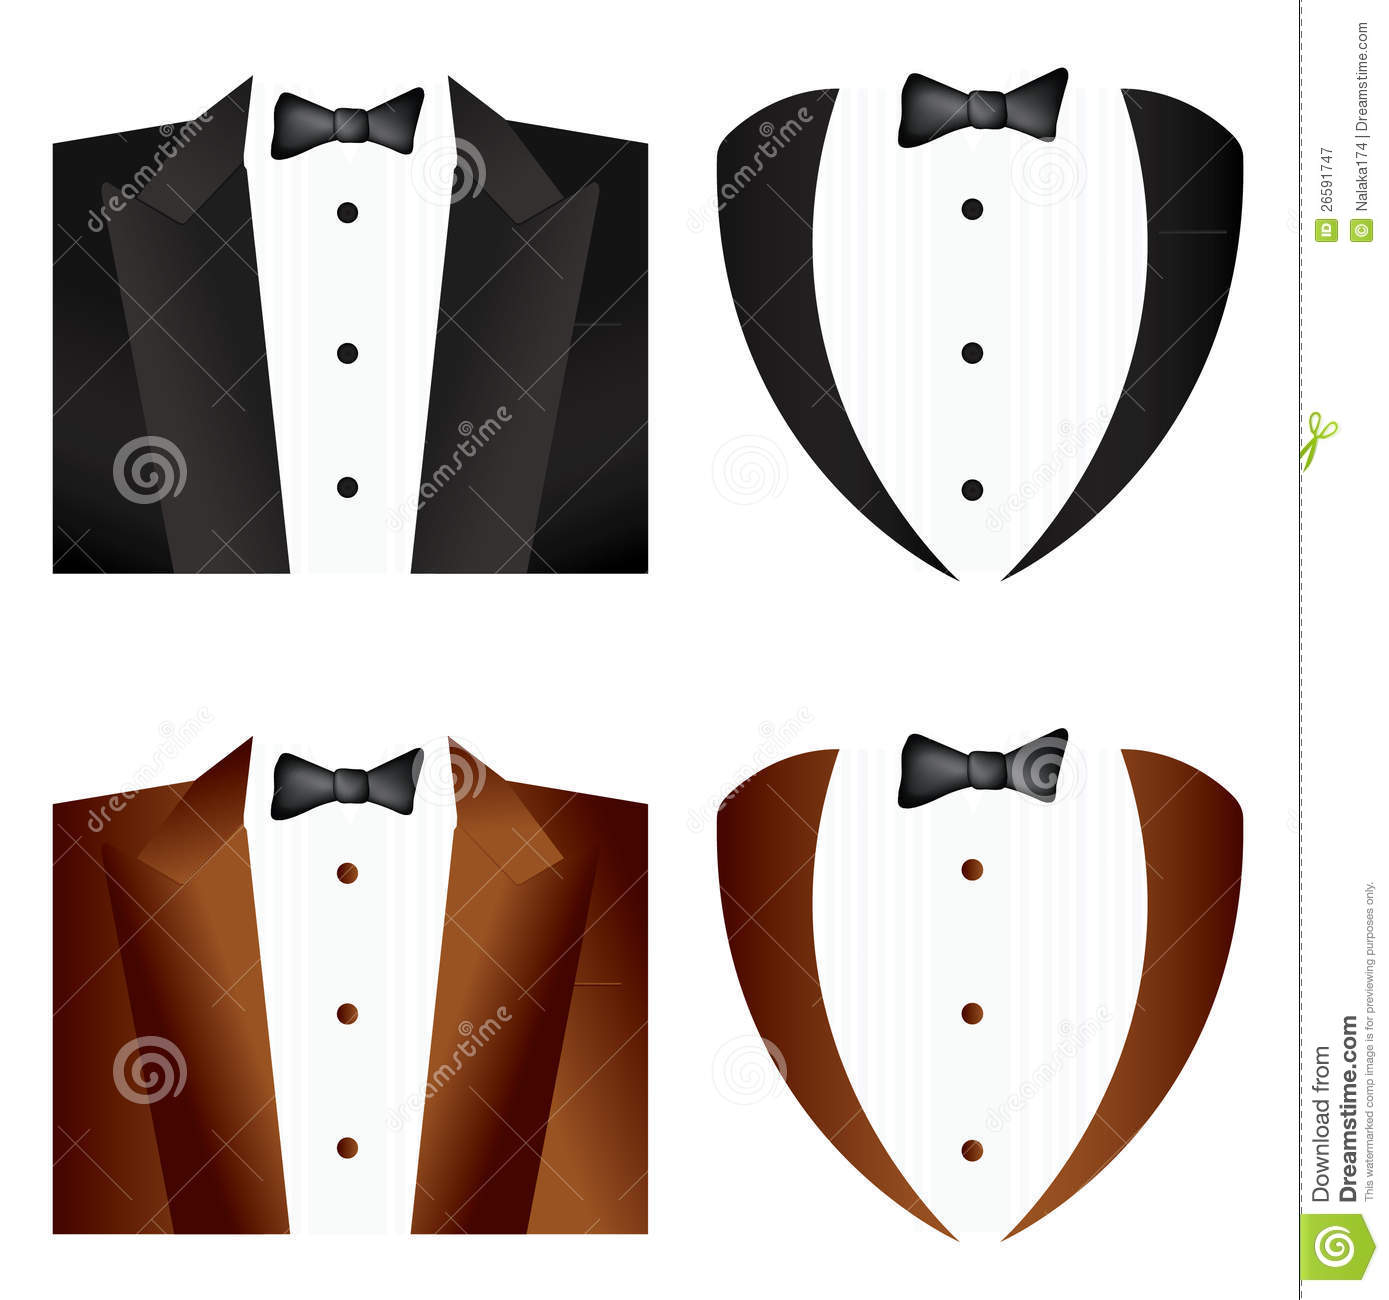     Free Stock Photography  Black And Brown Tie Tuxedo  Image  26591747